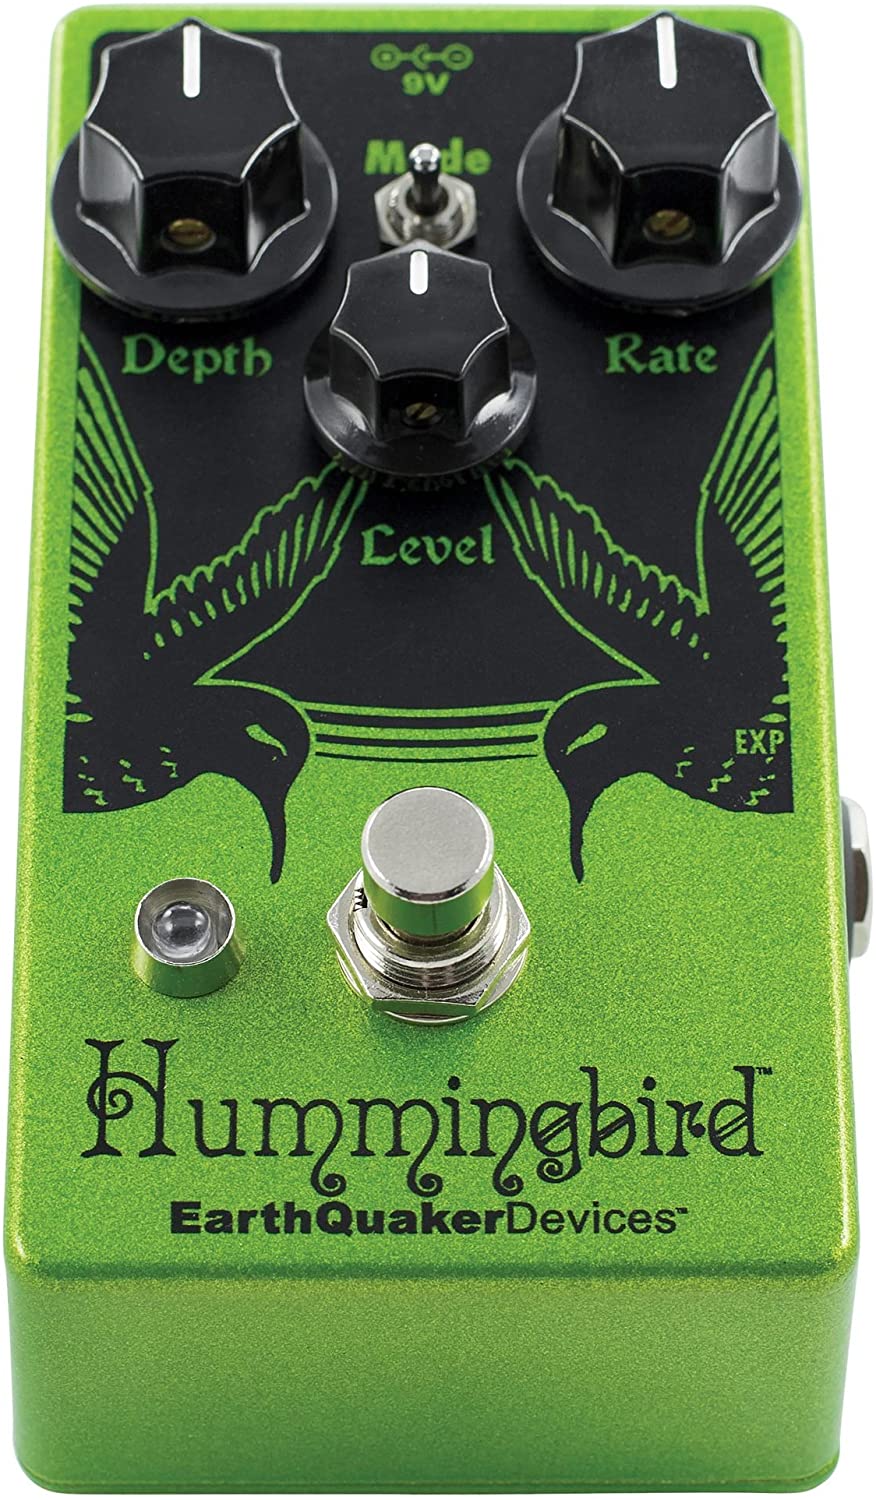 EarthQuaker Devices Hummingbird V4 Repeat Percussion Tremolo Guitar Effects Pedal